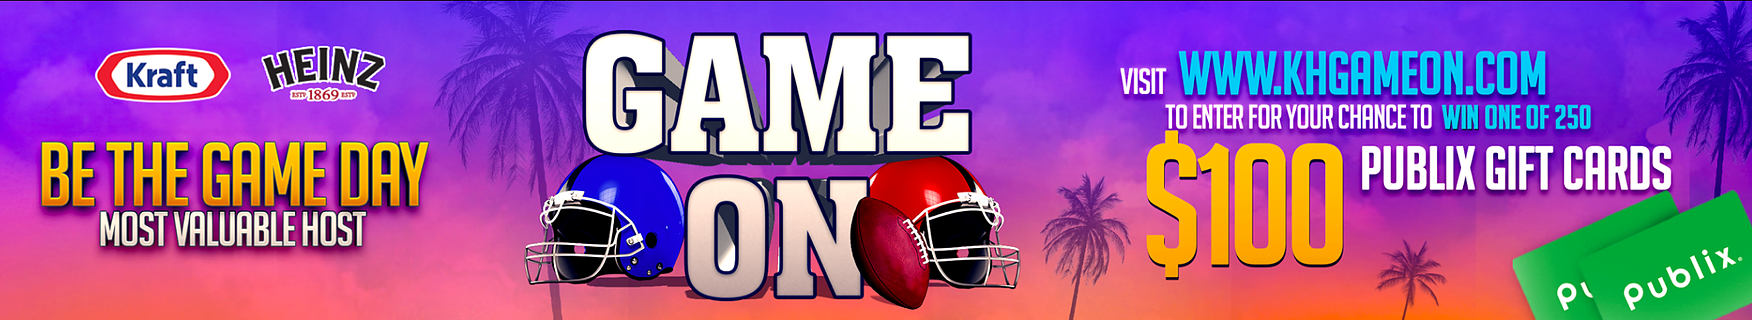 Game On - Get Ready For The Big Game And Enter To Win One Of 250 $100 Publix Gift Cards! on I Heart Publix